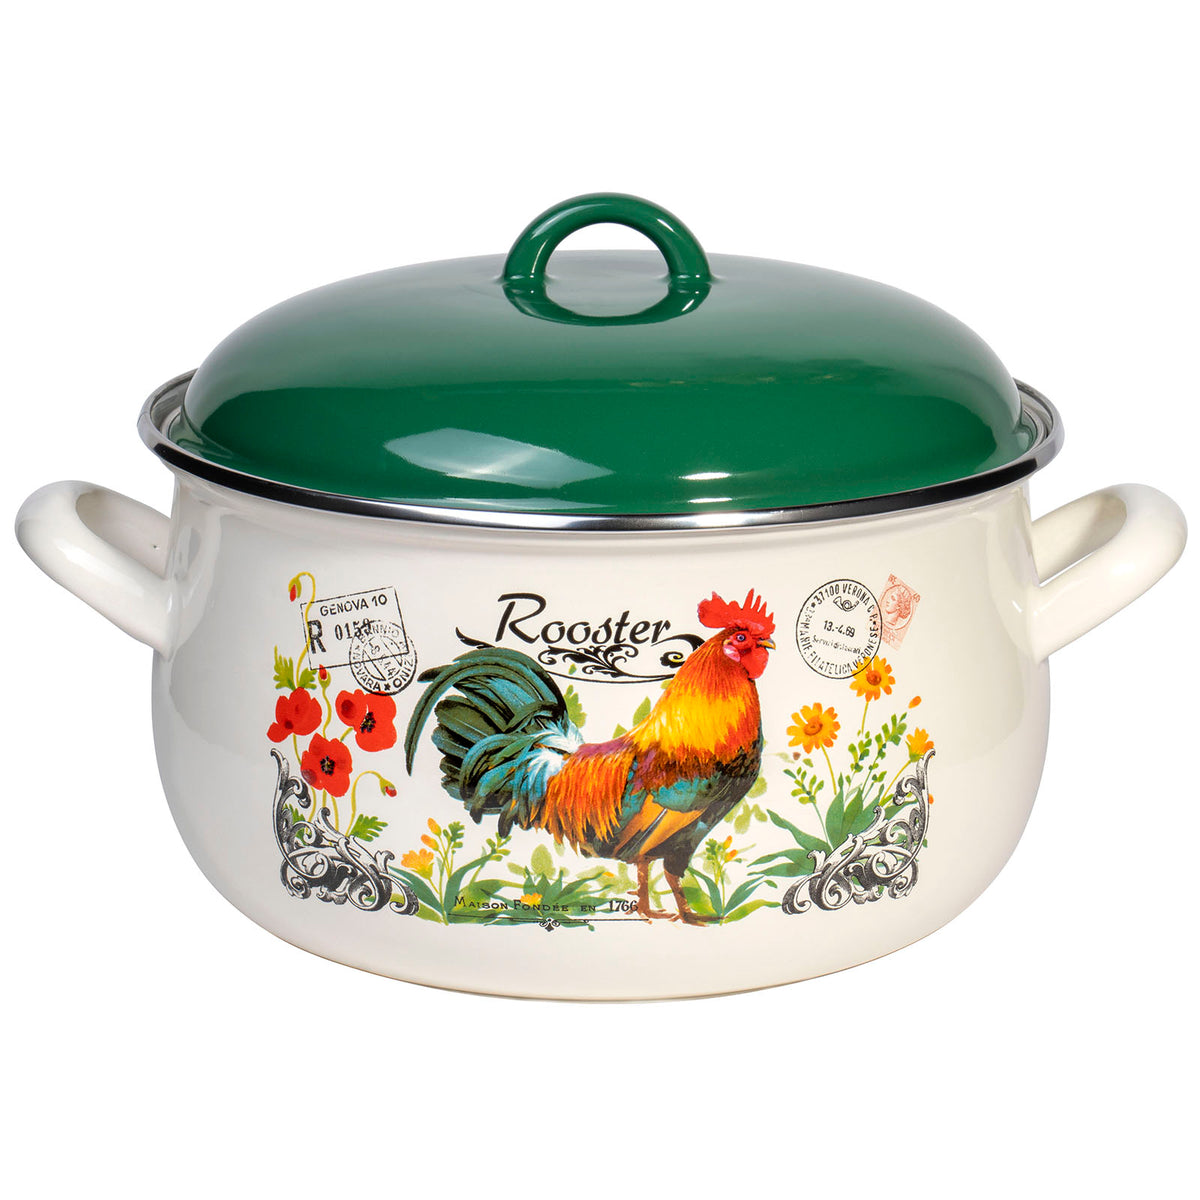 APPLES Enamelware Stockpot with Glass Lid, Enameled Cooking Pot 5